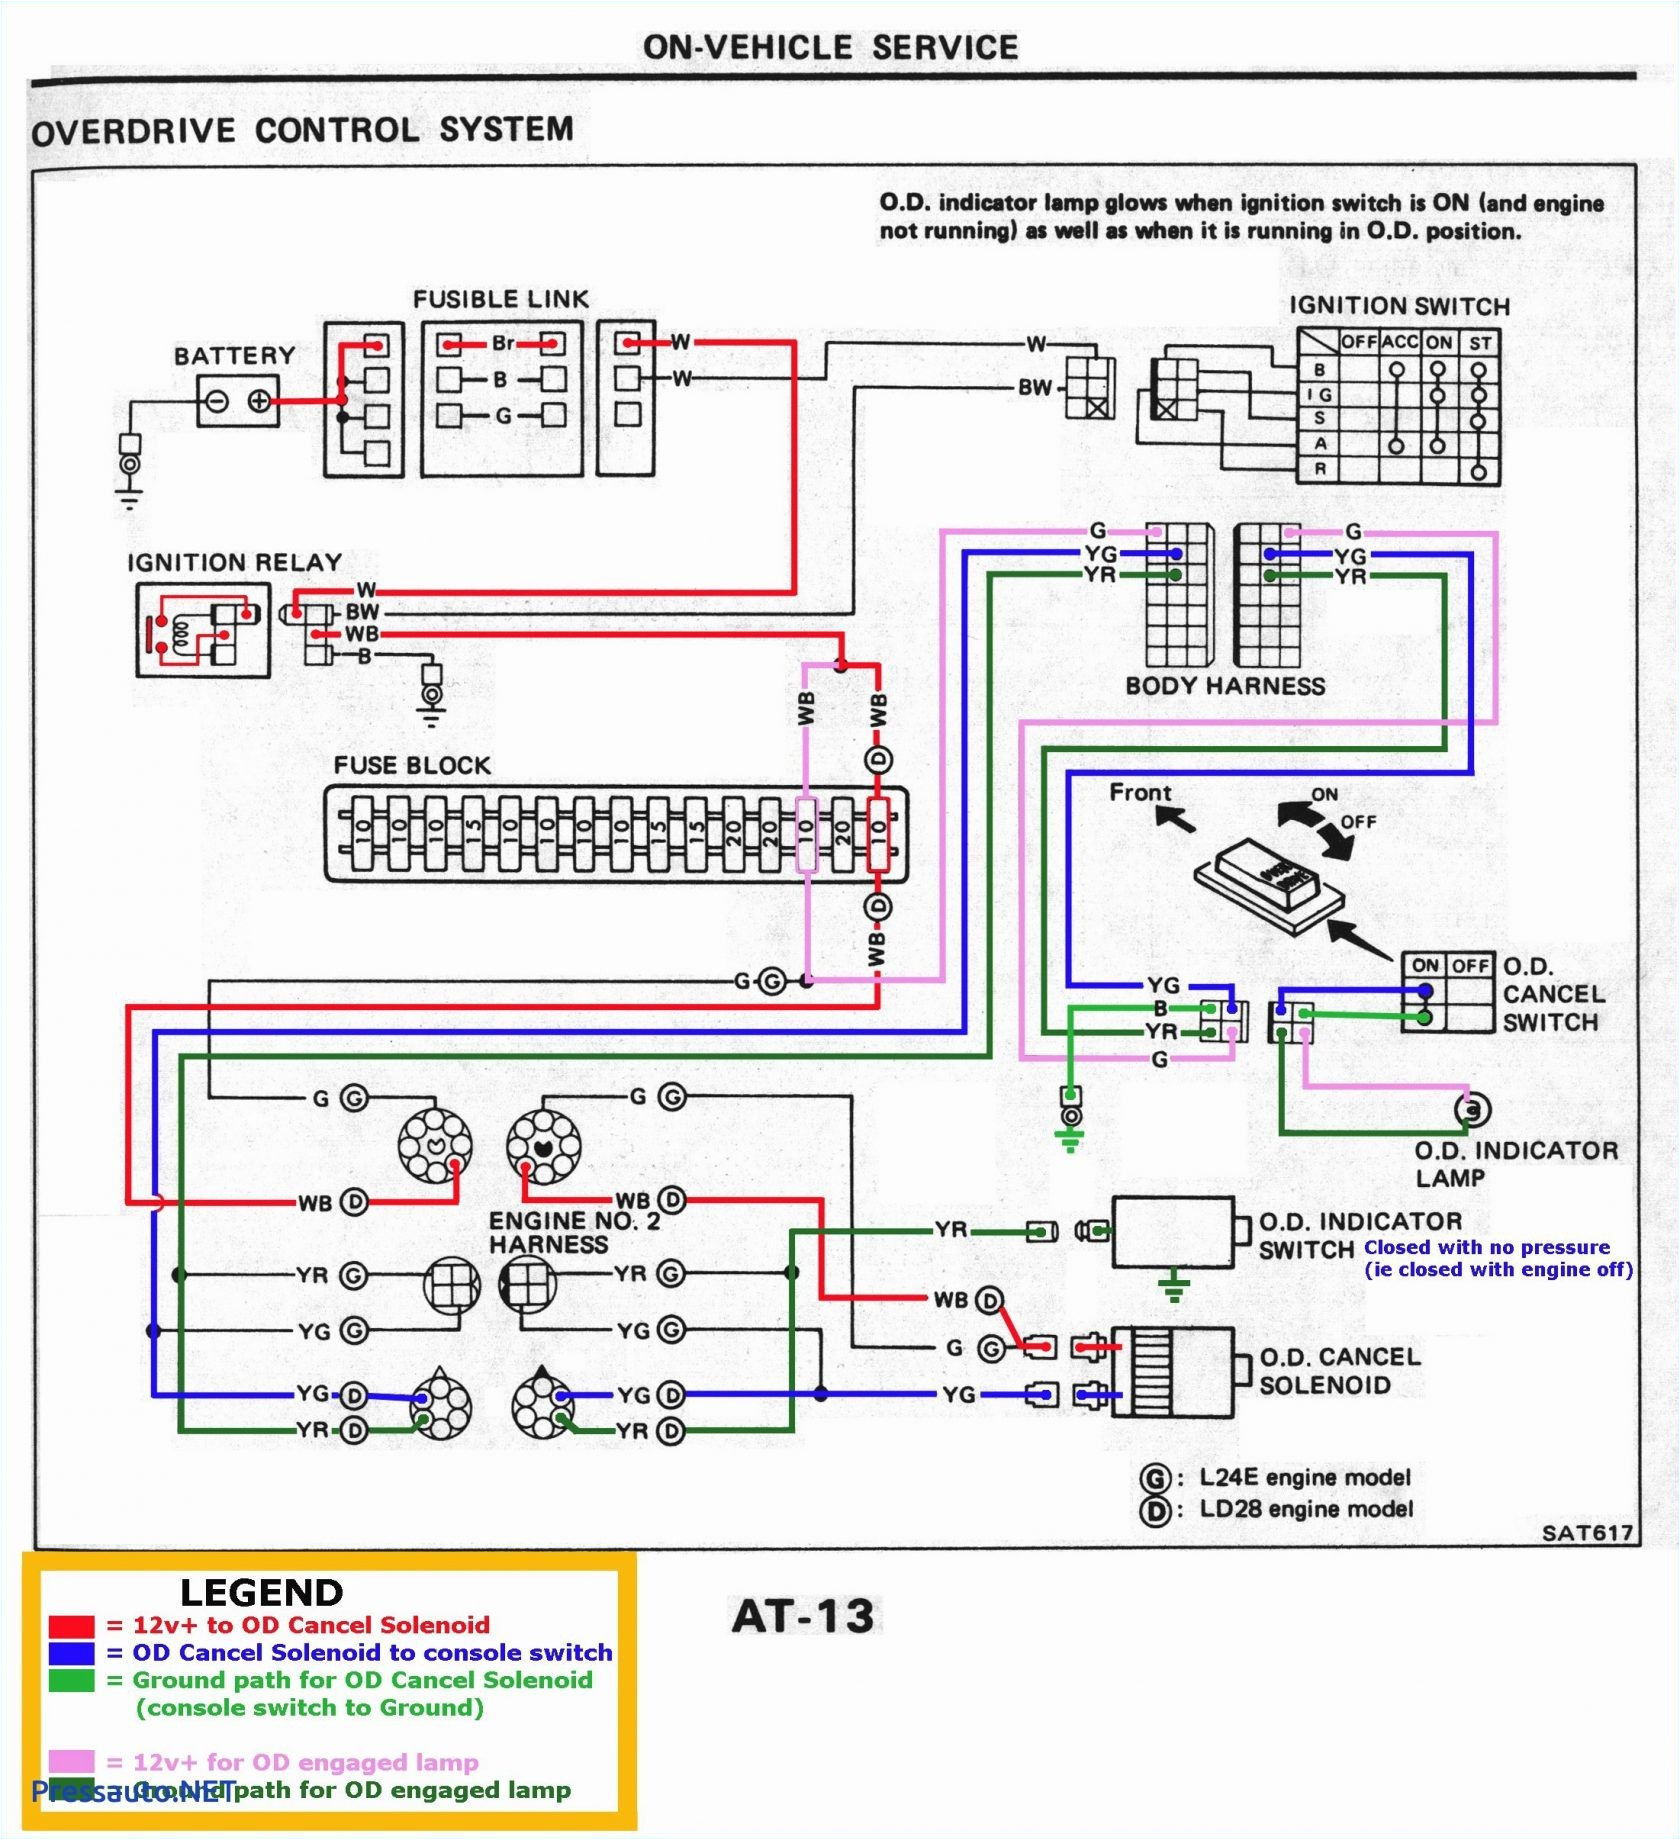 2008 ford Ranger Wiring Diagram ford Wiring Diagram Colour Codes Gone Fuse15 Klictravel Nl